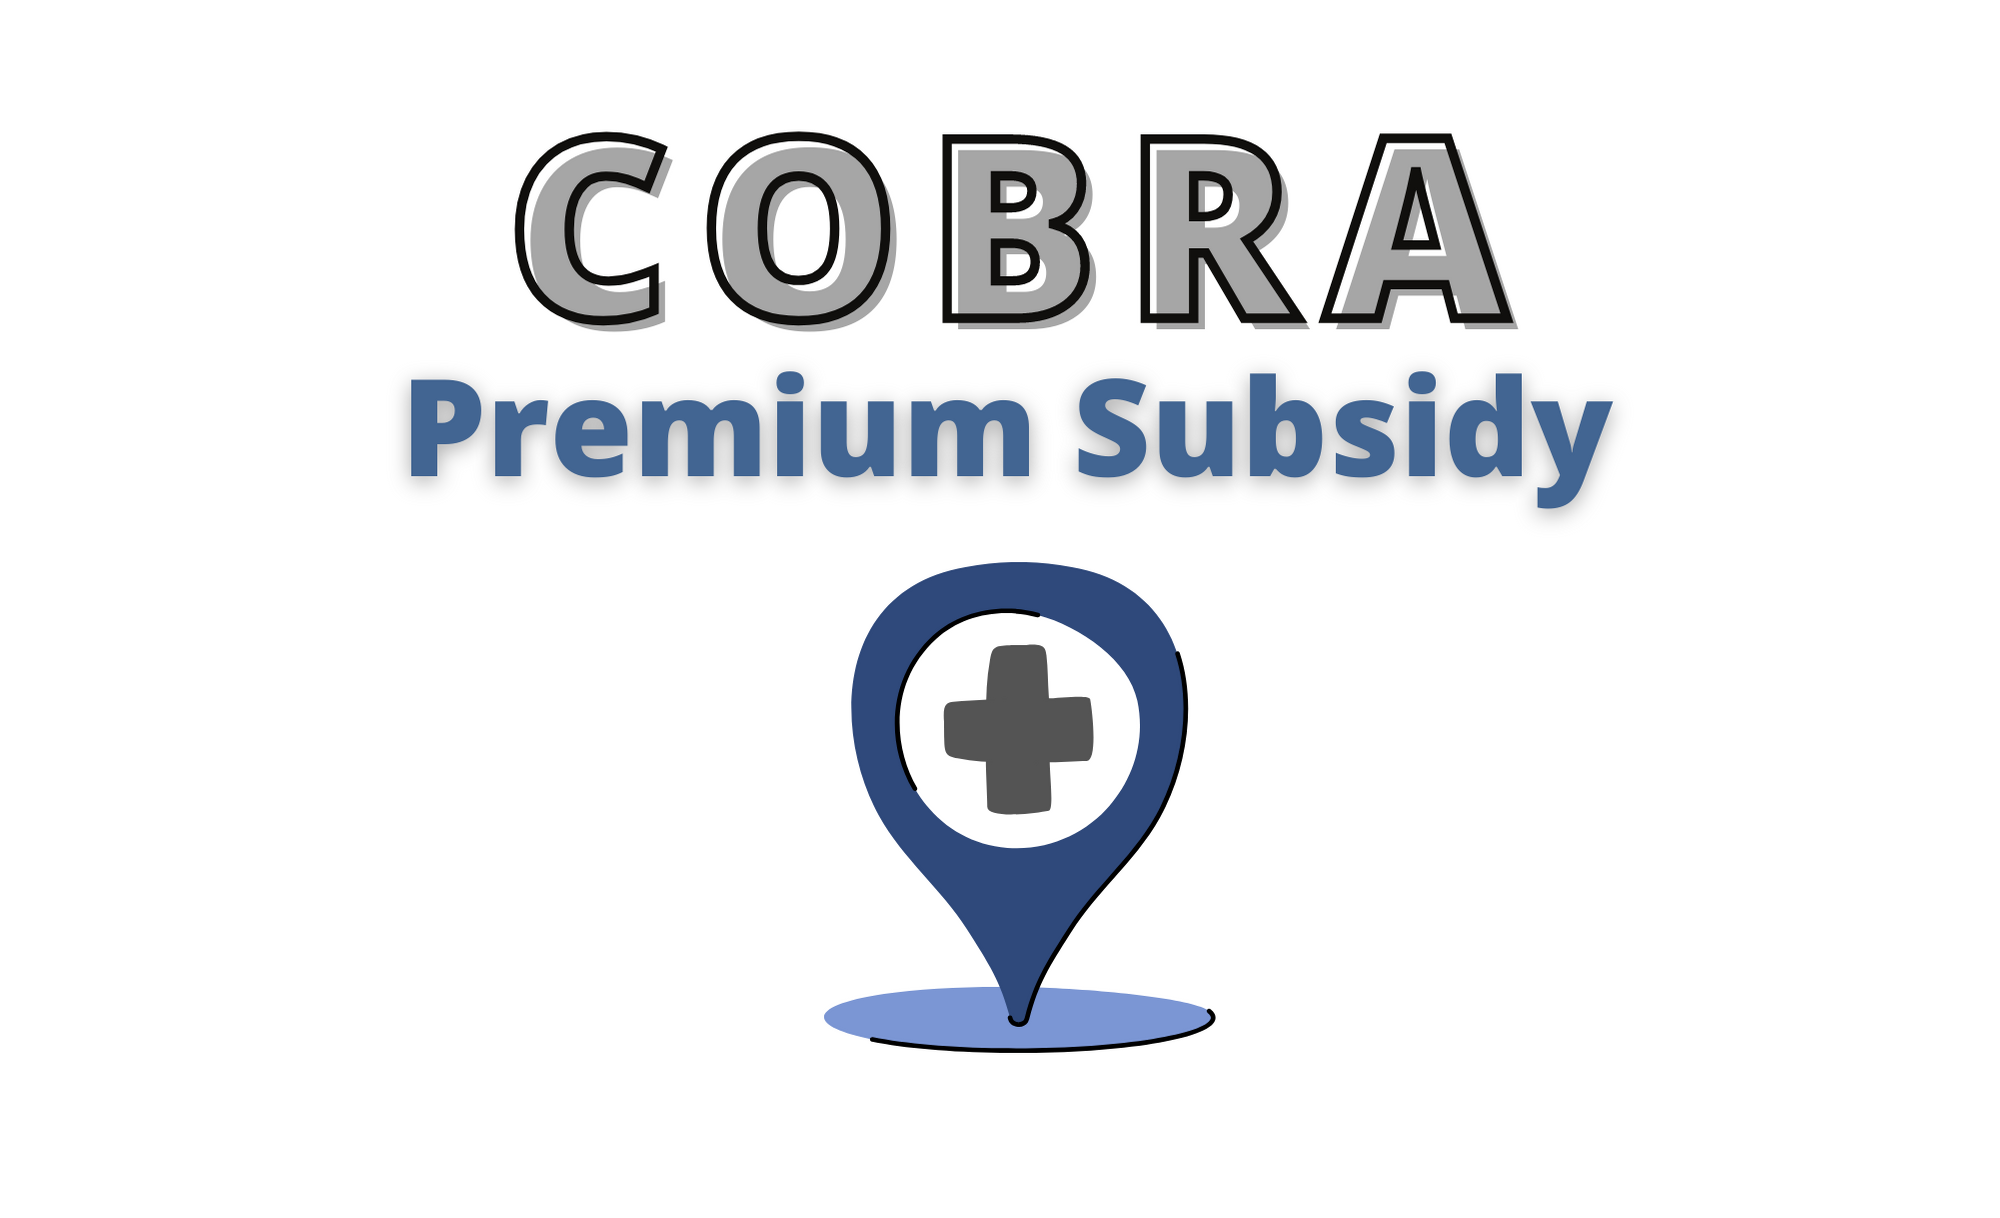 COBRA Premium Subsidy • Corporate Payroll Services